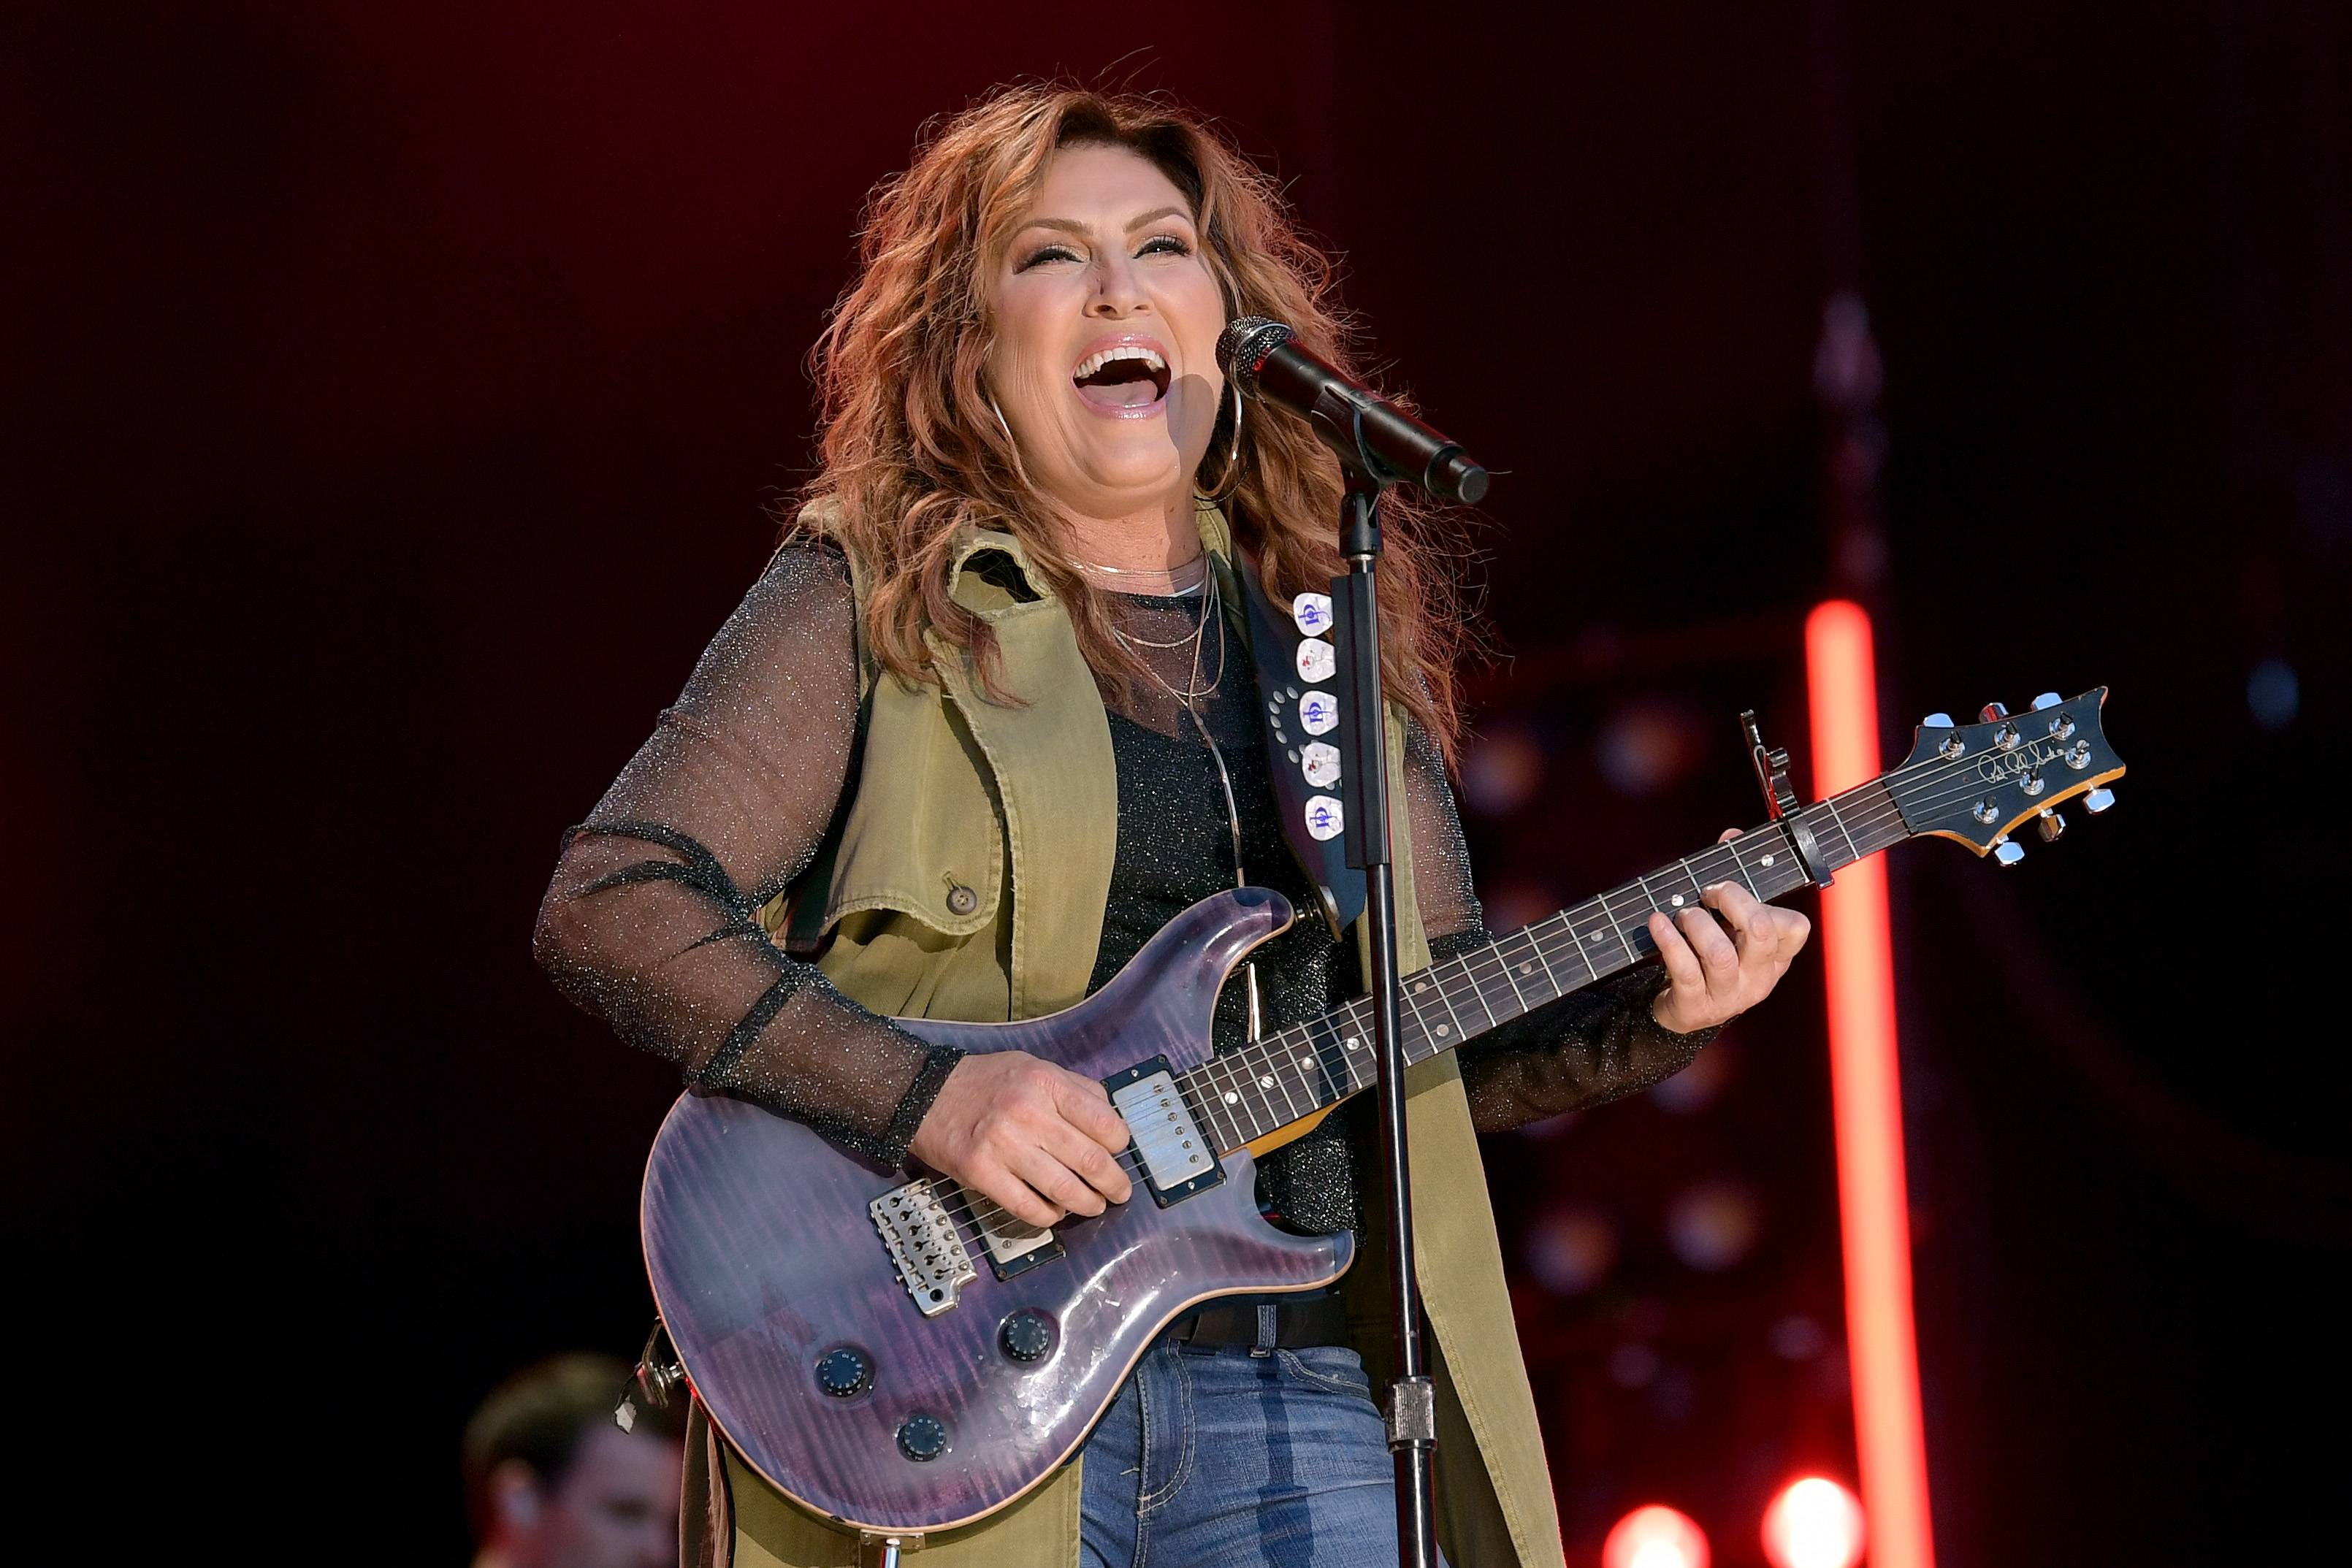 NASHVILLE, TENNESSEE - JUNE 07: (EDITORIAL USE ONLY) Jo Dee Messina performs on stage during day 2 for the 2019 CMA Music Festival on June 07, 2019 in Nashville, Tennessee. 